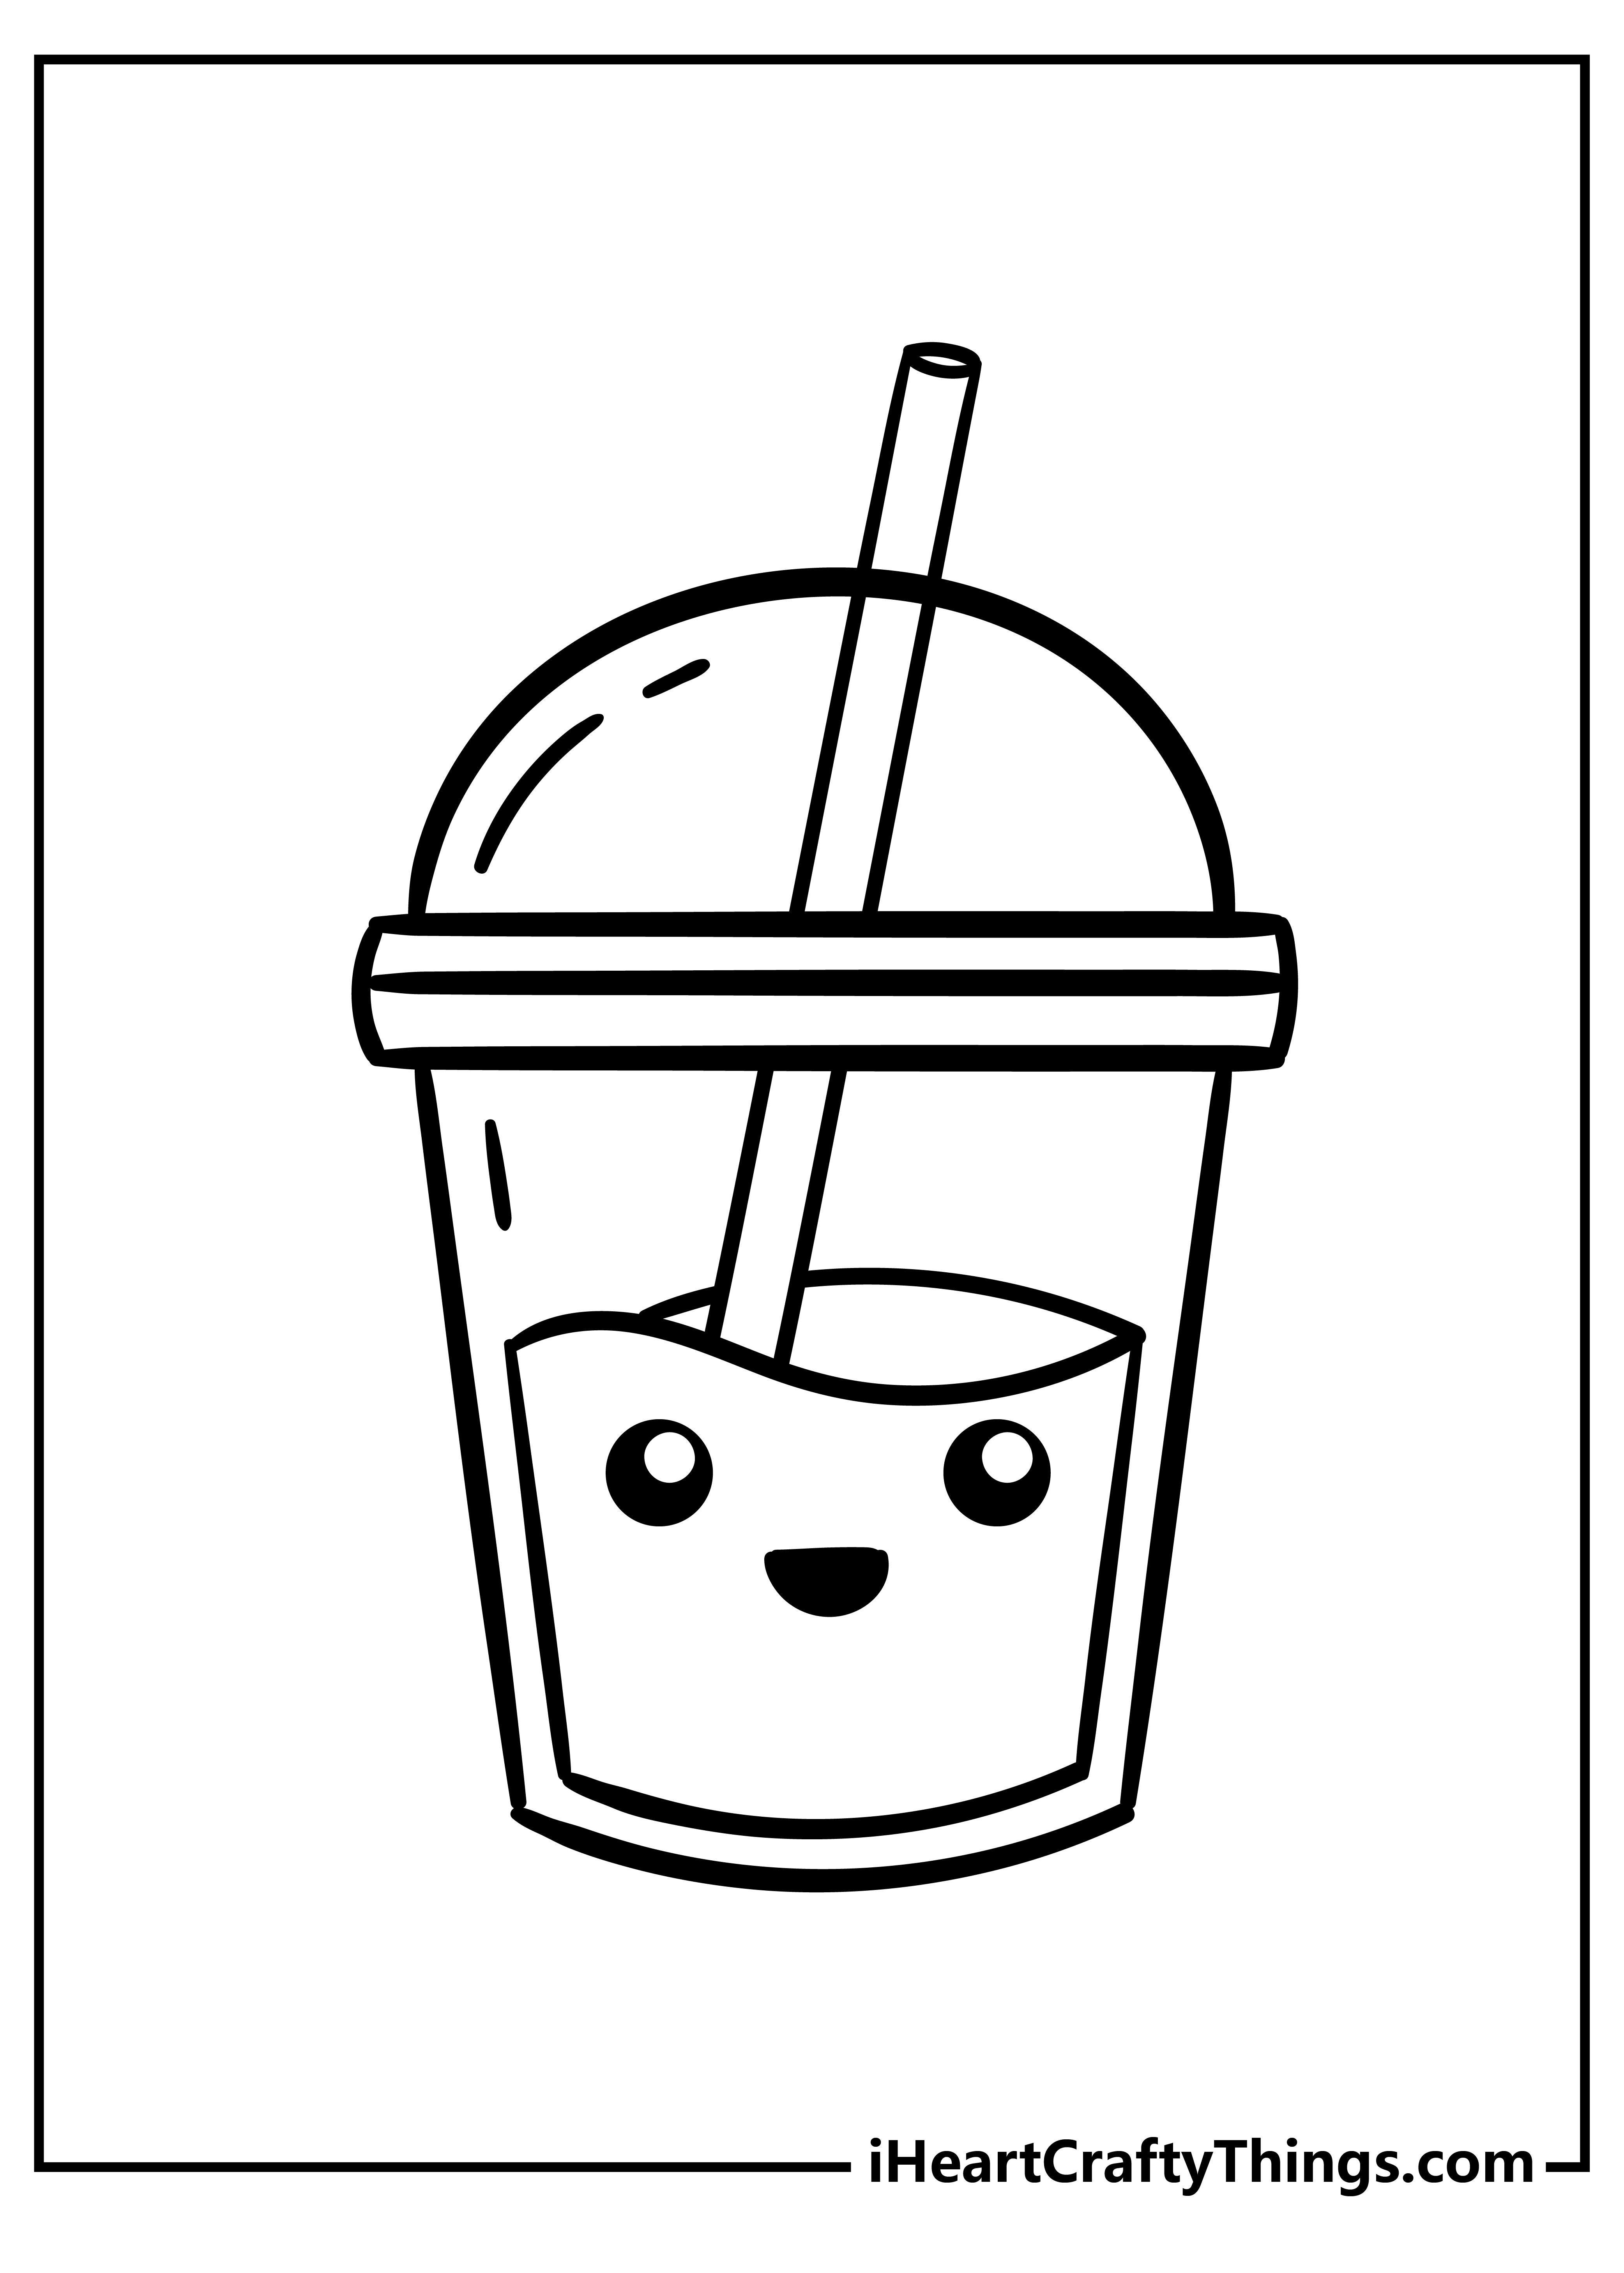 Cute food coloring pages food coloring pages coloring pages cute food